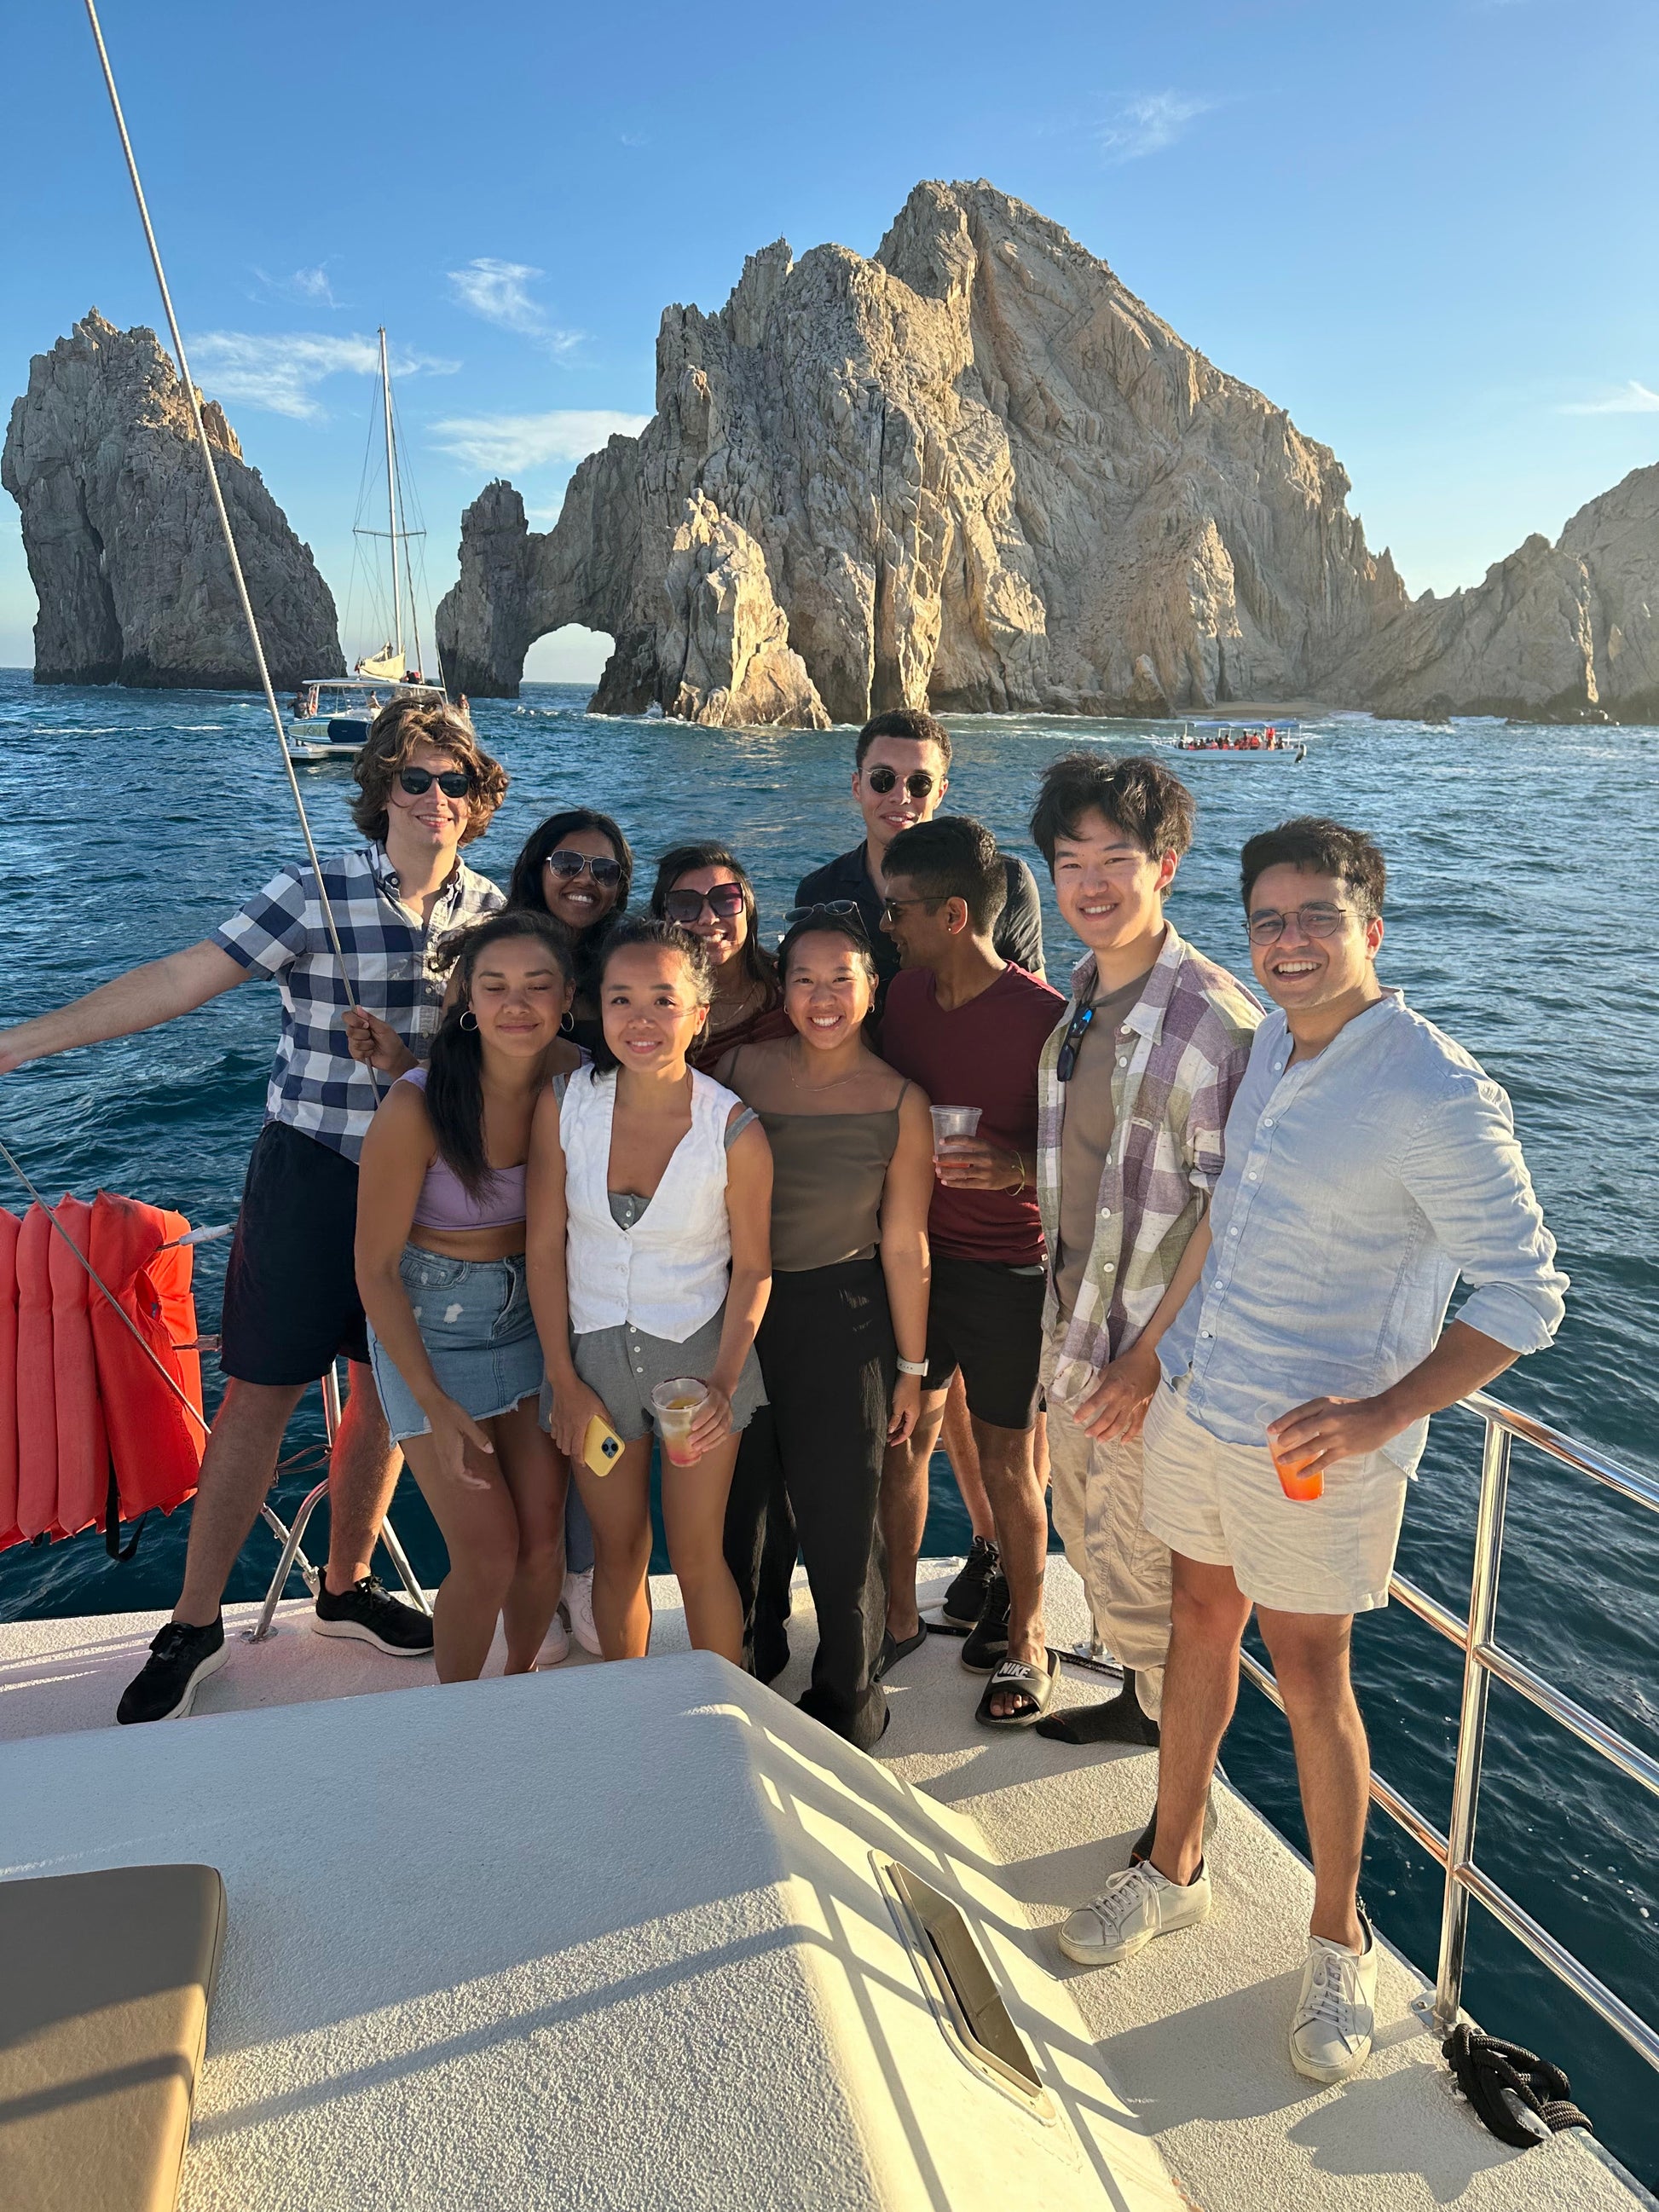 New friends smiling and drinking on a boat together in Los Cabos.